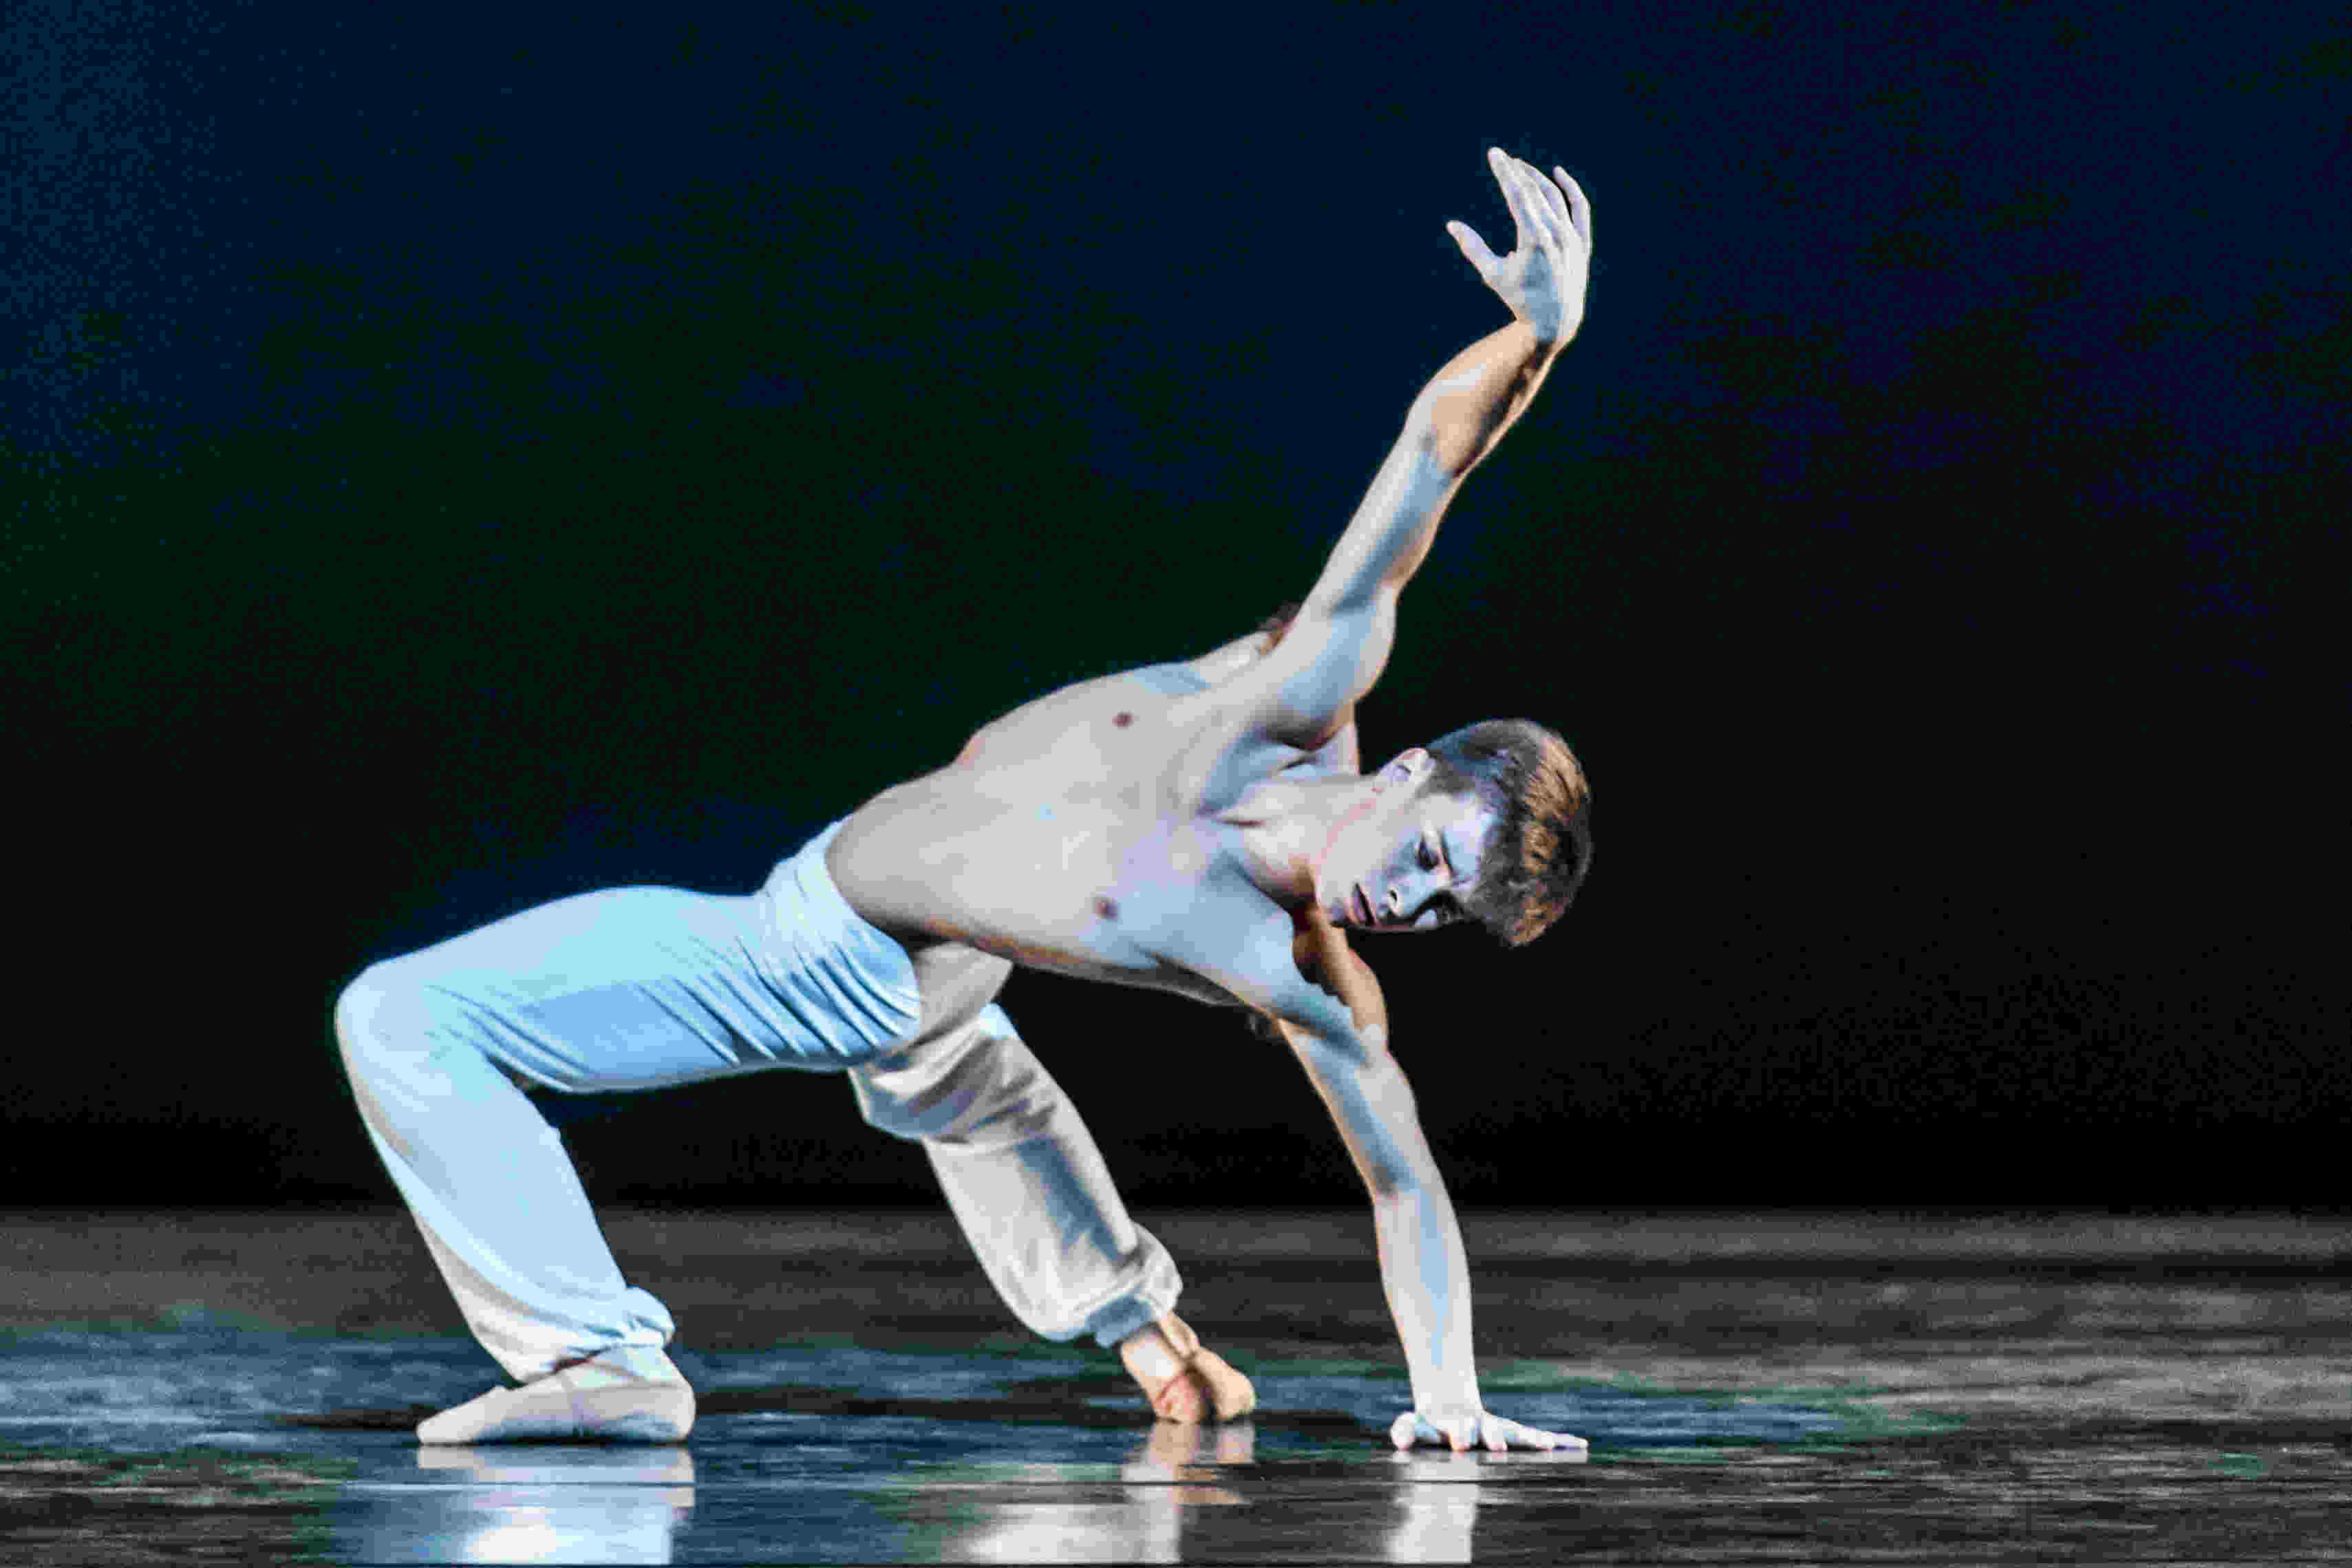 Australian Calvin Richardson performs his own Dying Swan solo